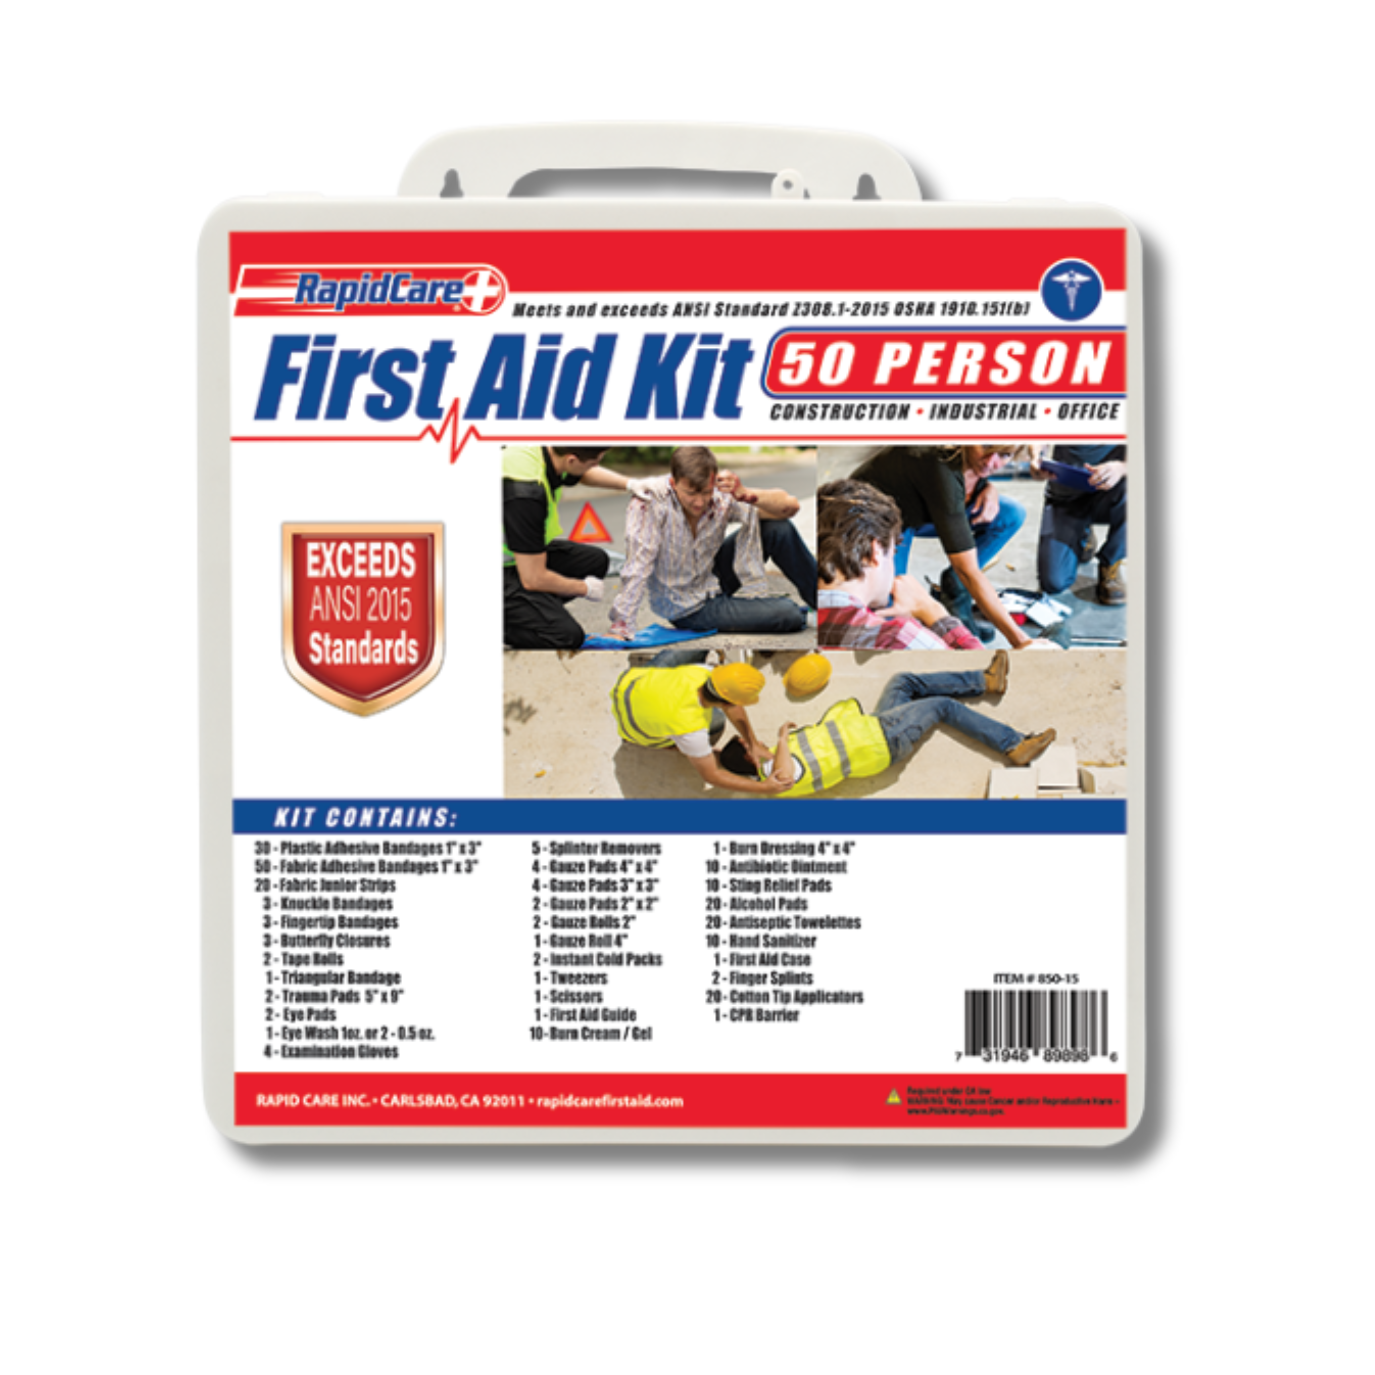 50 Person First Aid Kit - 2015.